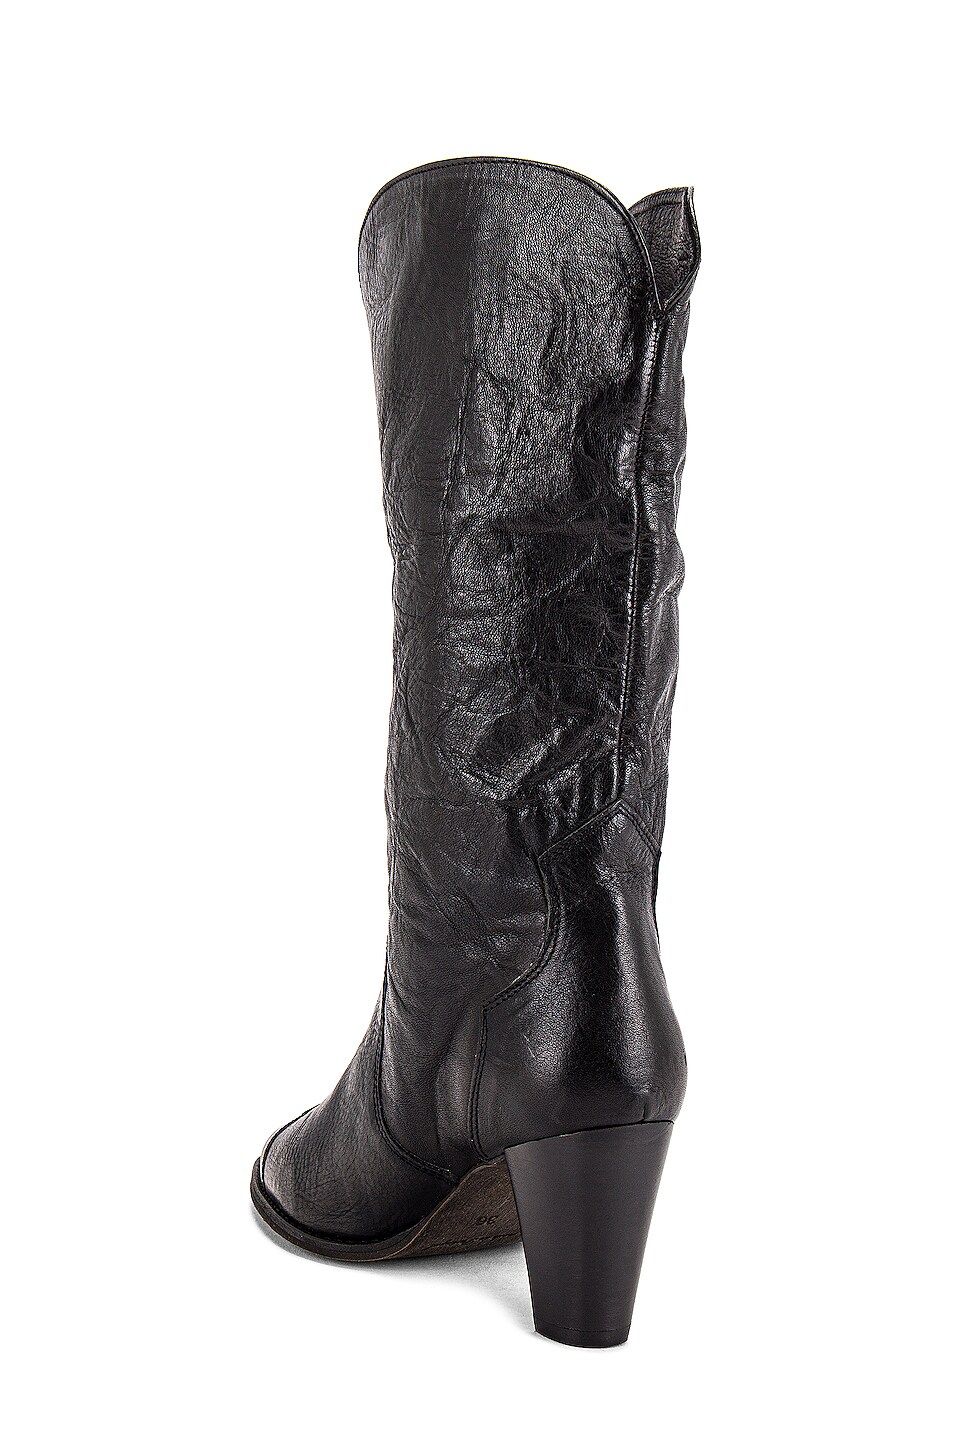 Free People Shayne Tall Western Boot in Black | REVOLVE